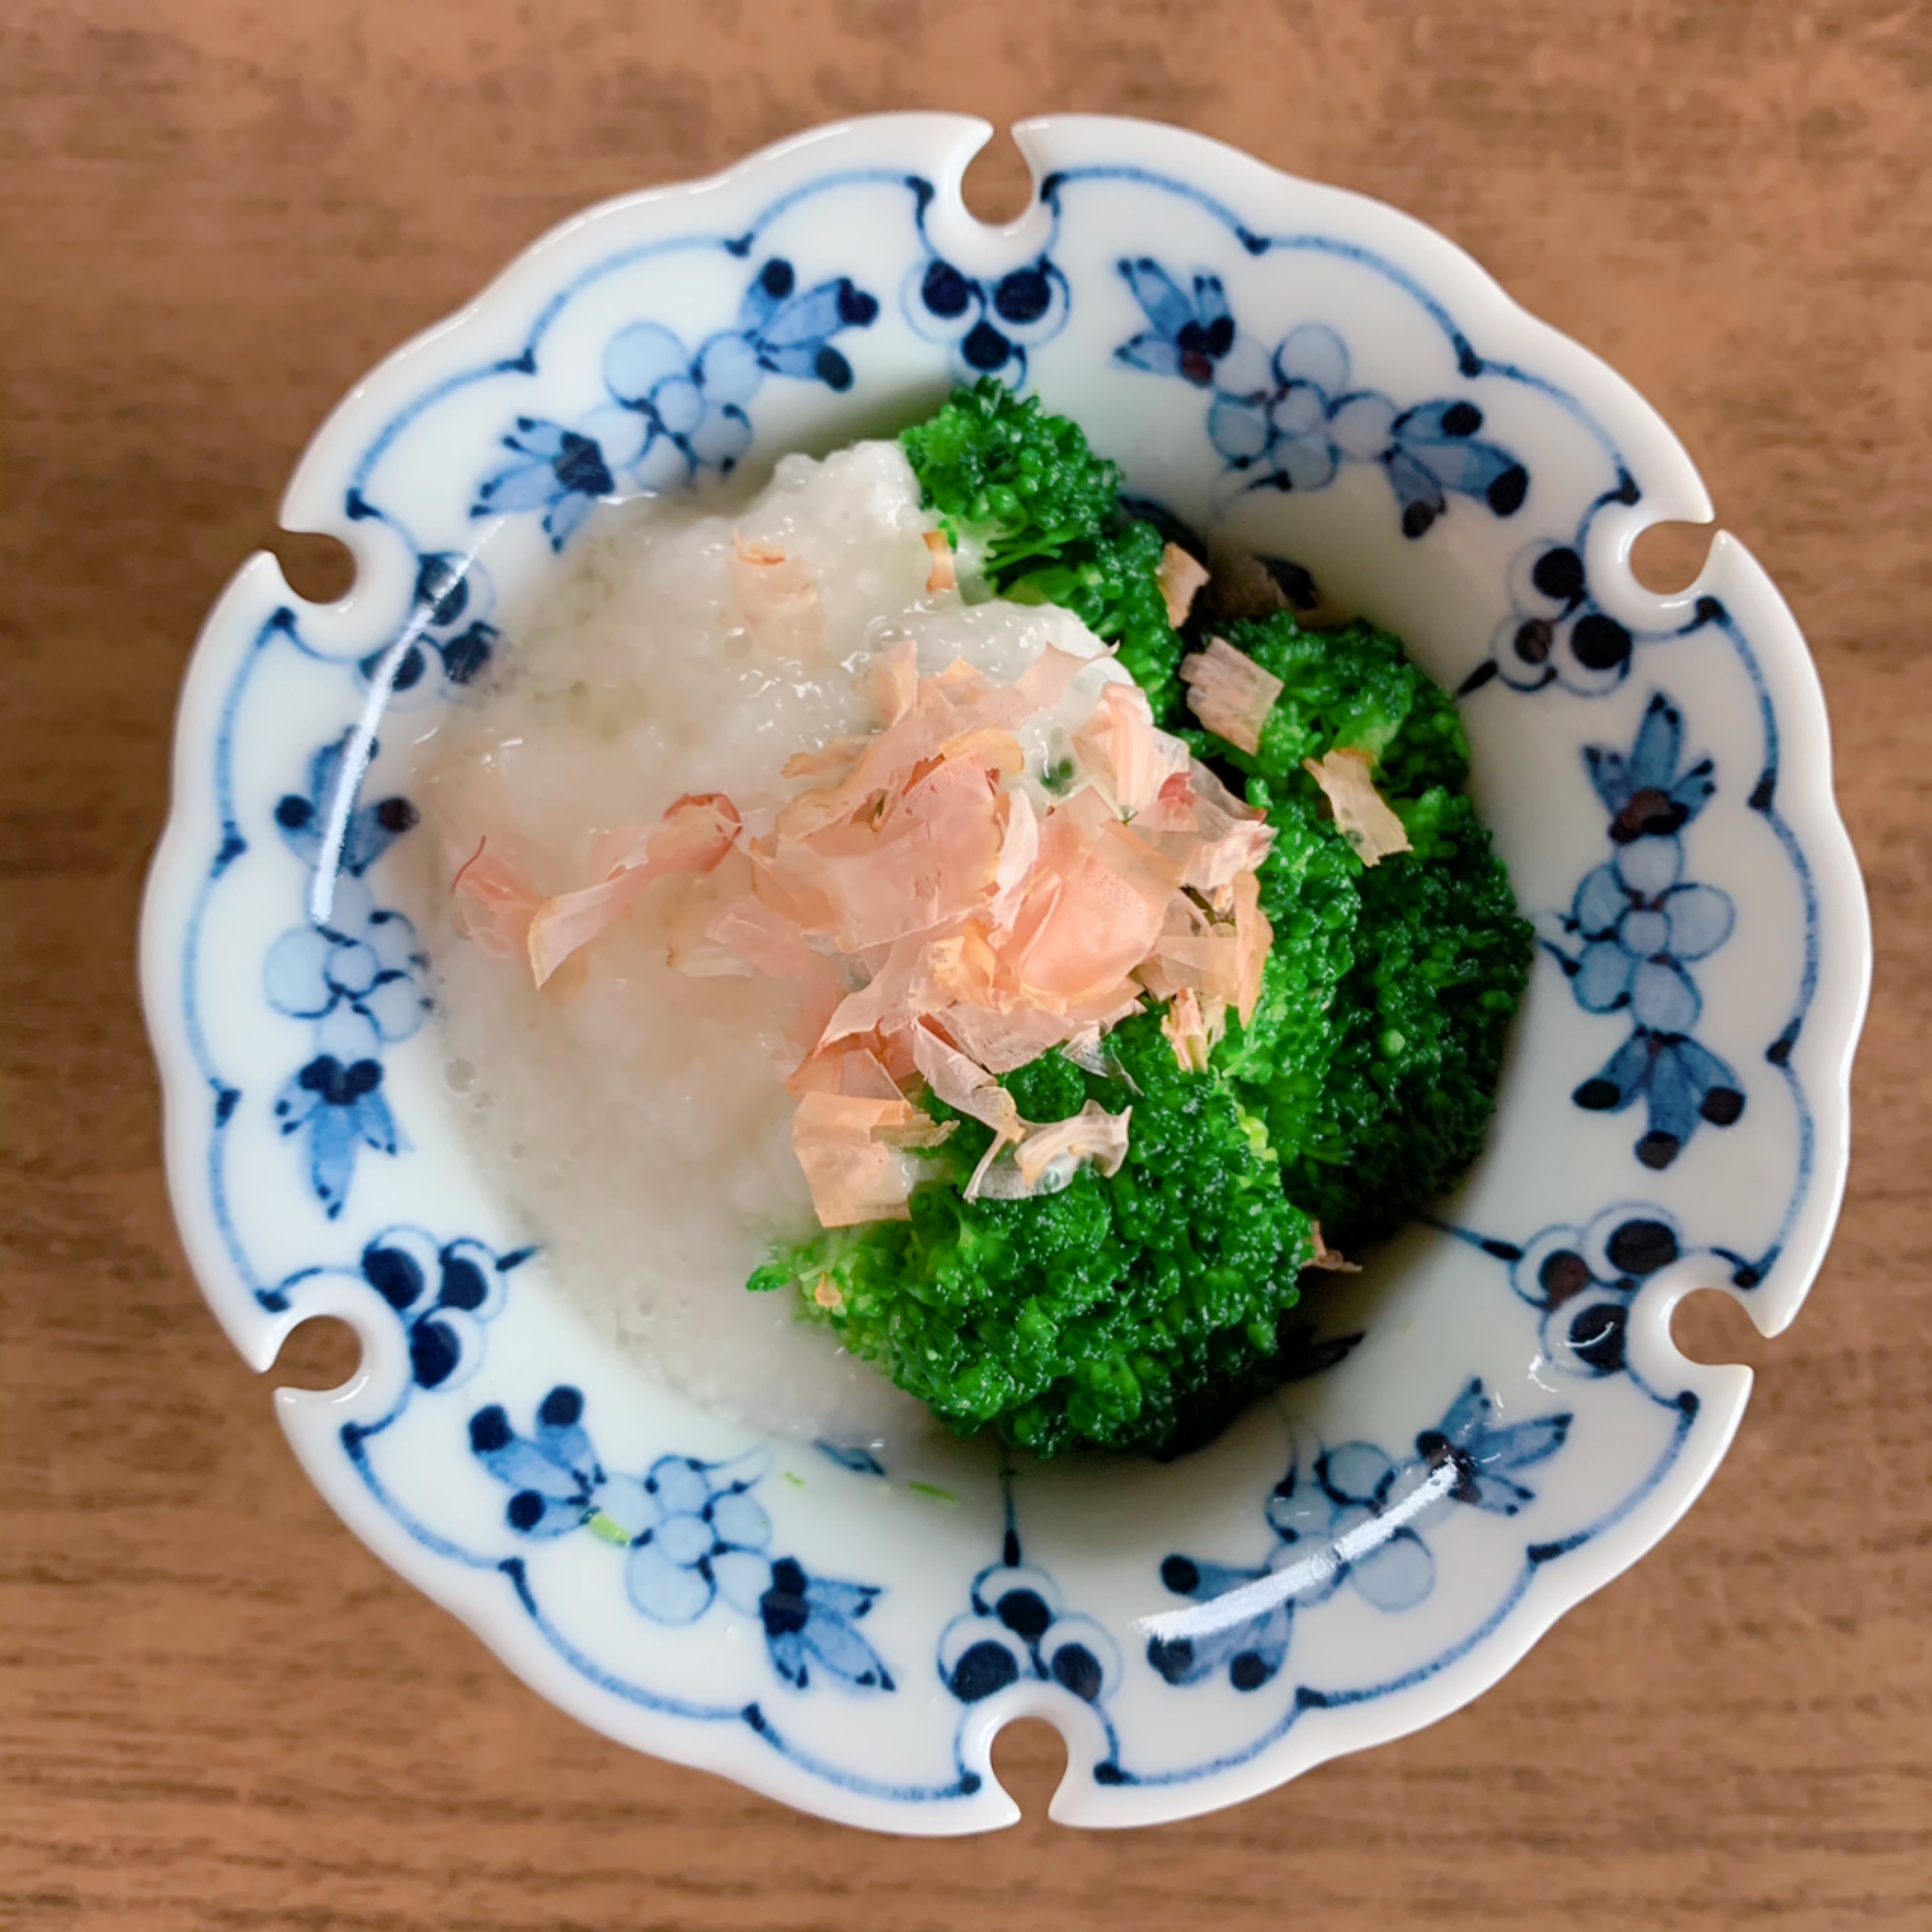 It is a dish of broccoli topped with grated yam and seasoned with salt koji.